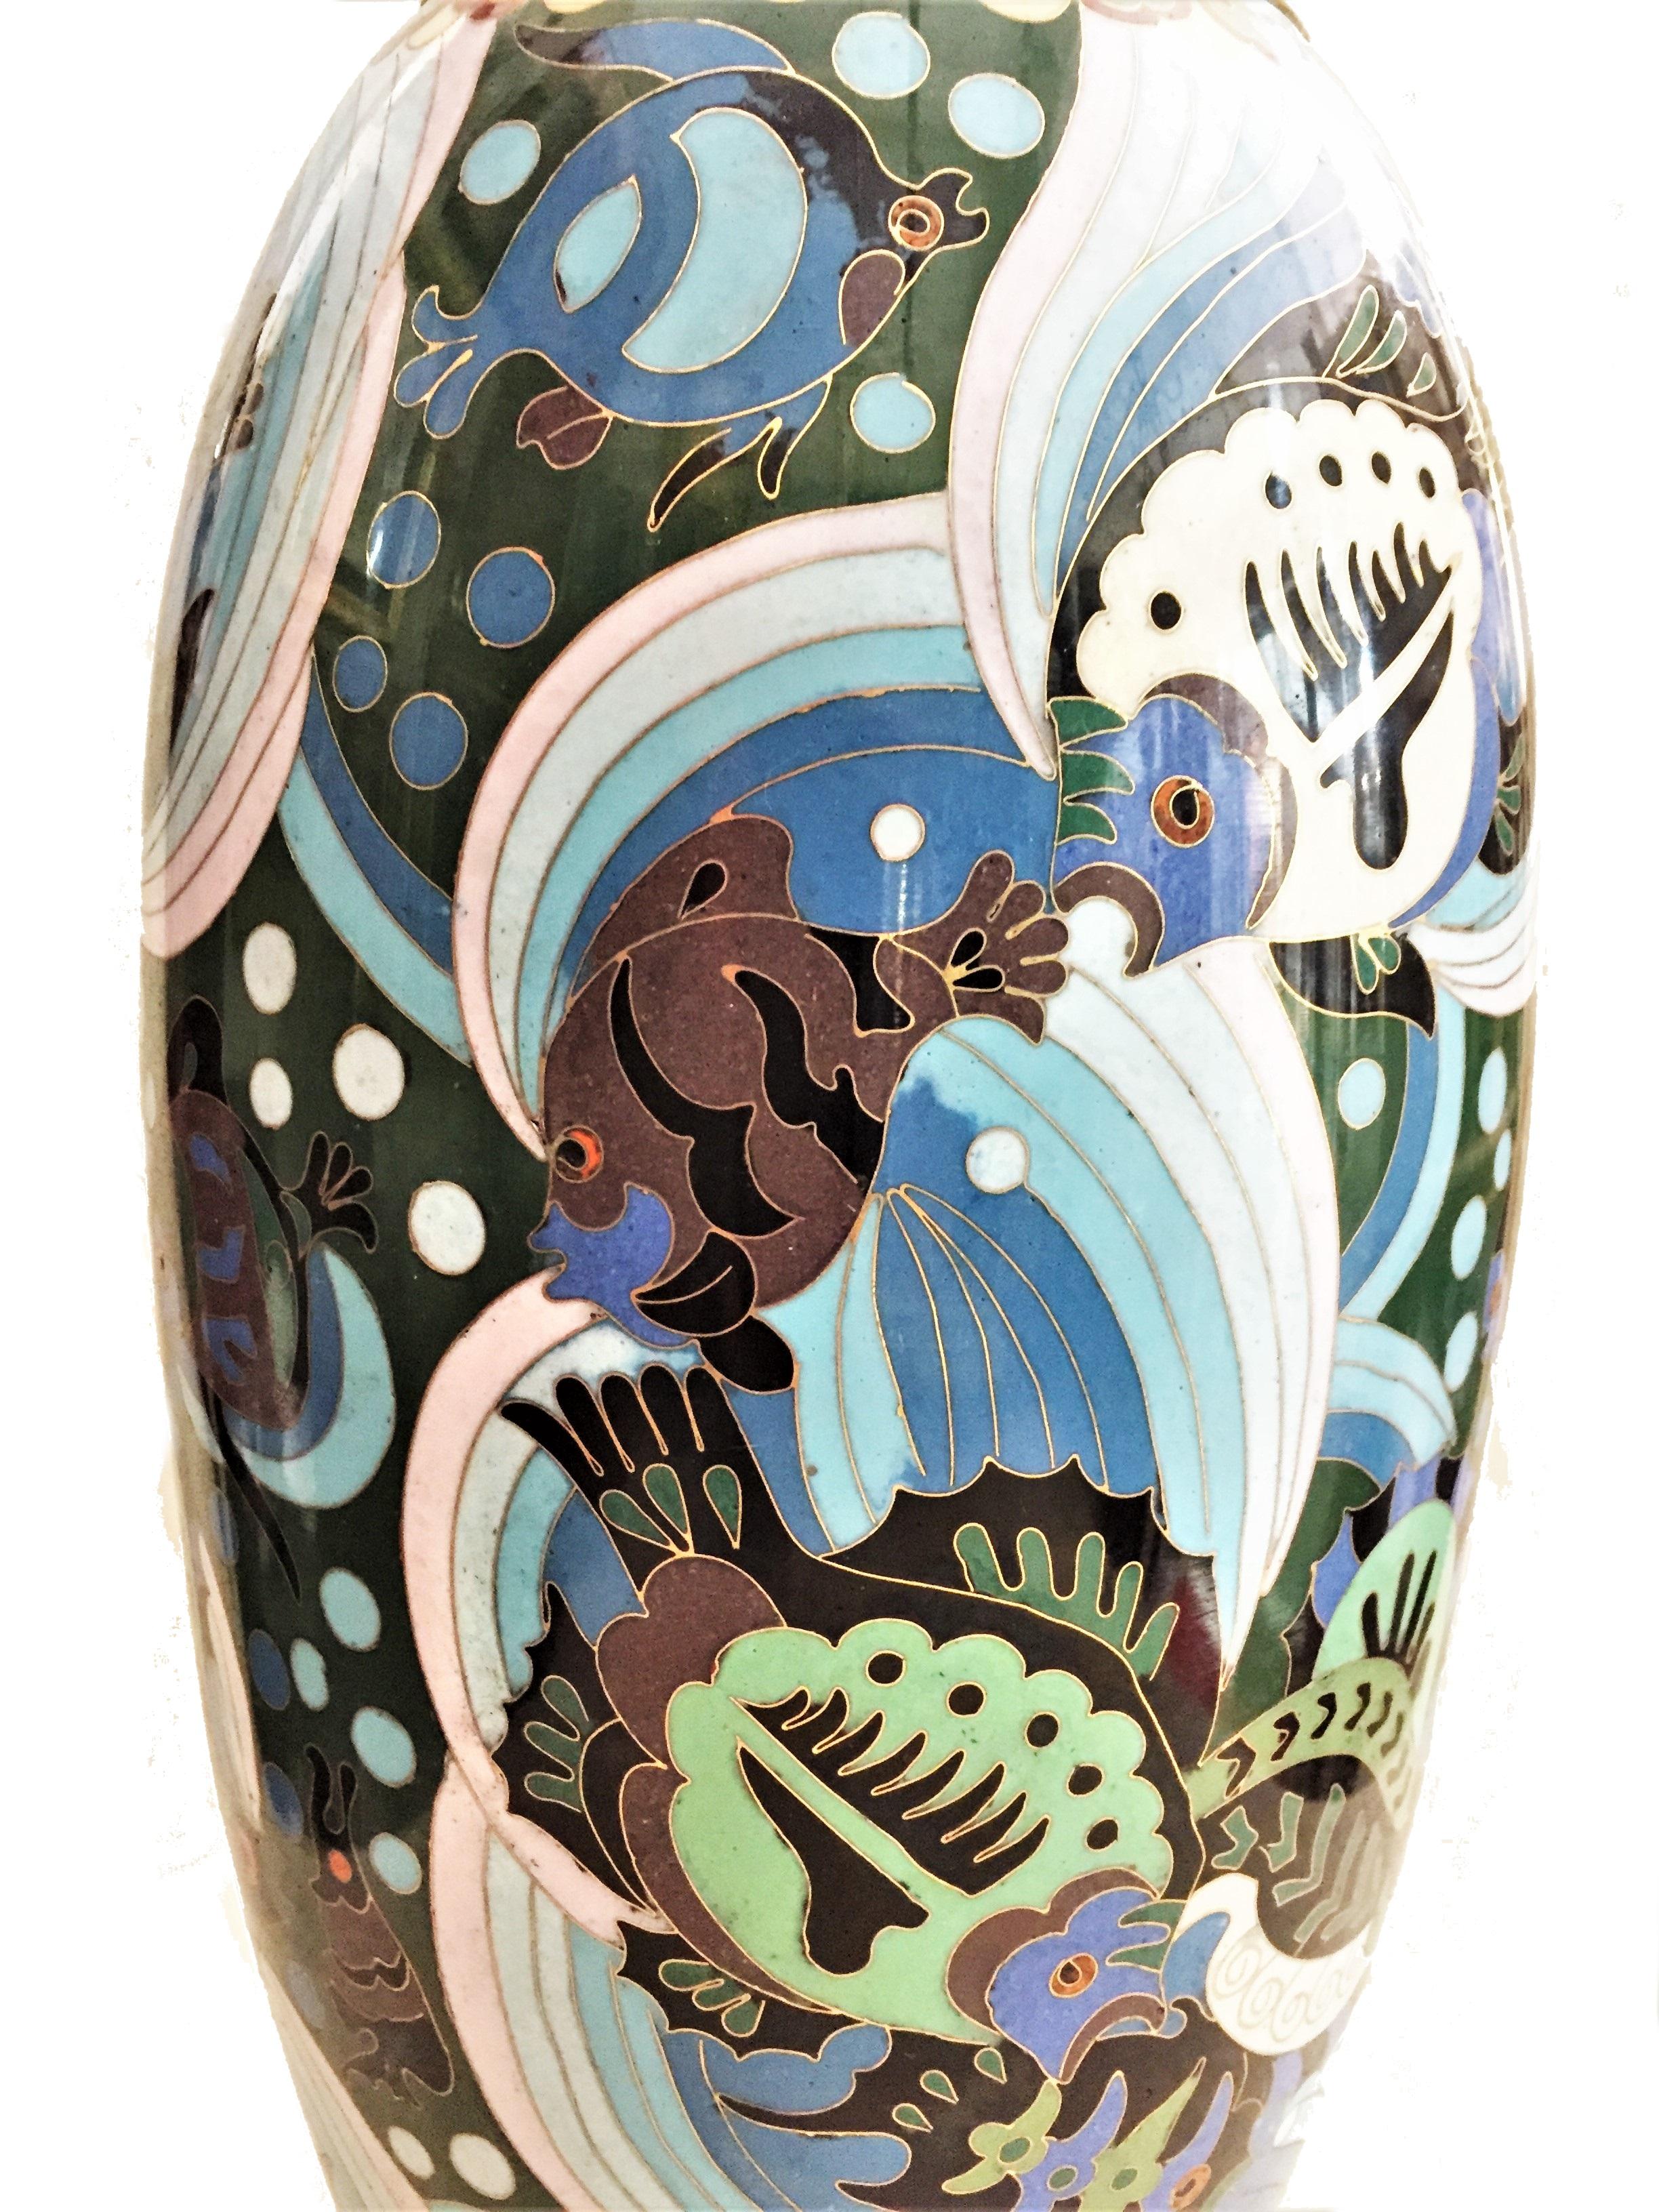 Dimensions:
Height: 15-1/4 inches 
Diameter: 7 inches

Probably, by Maison Paul Lauchet Paris, this elegant French Art Deco flower vase combines the simplicity and brevity of lines of the stylized fish and sea horses on the foreground of sea